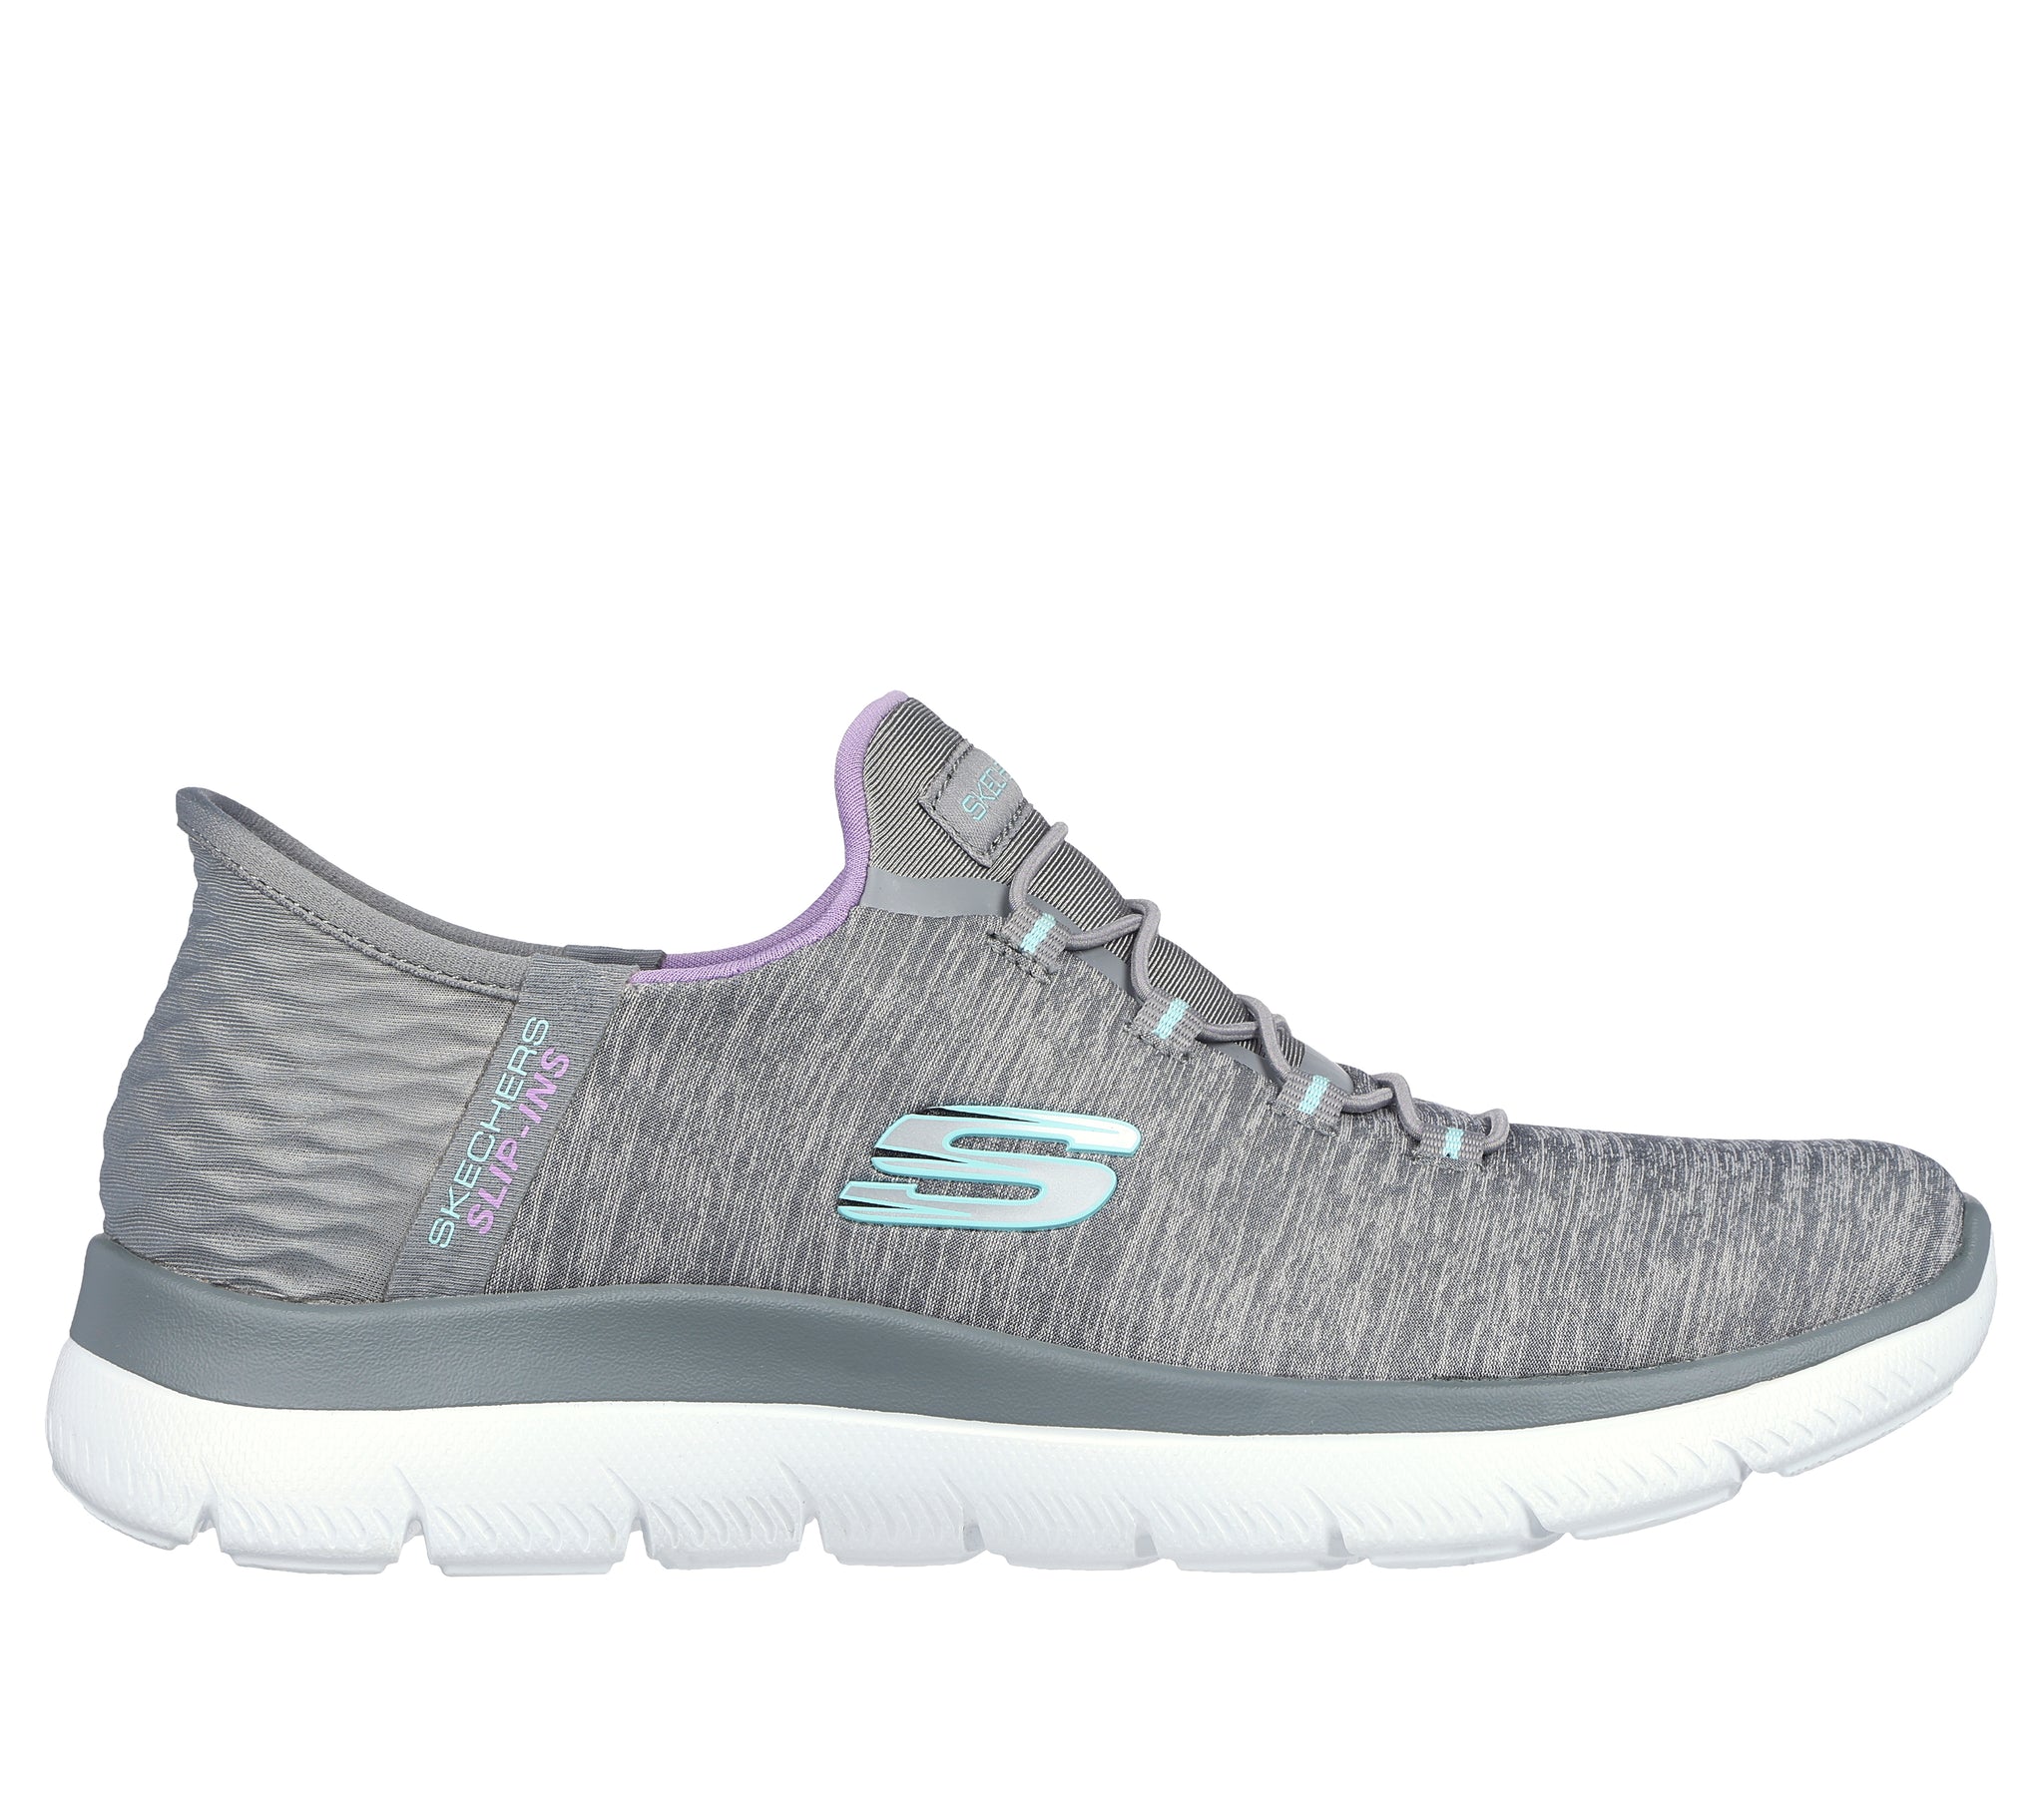 TOPAZ HORIZON: Getting fit with Skechers Sport!